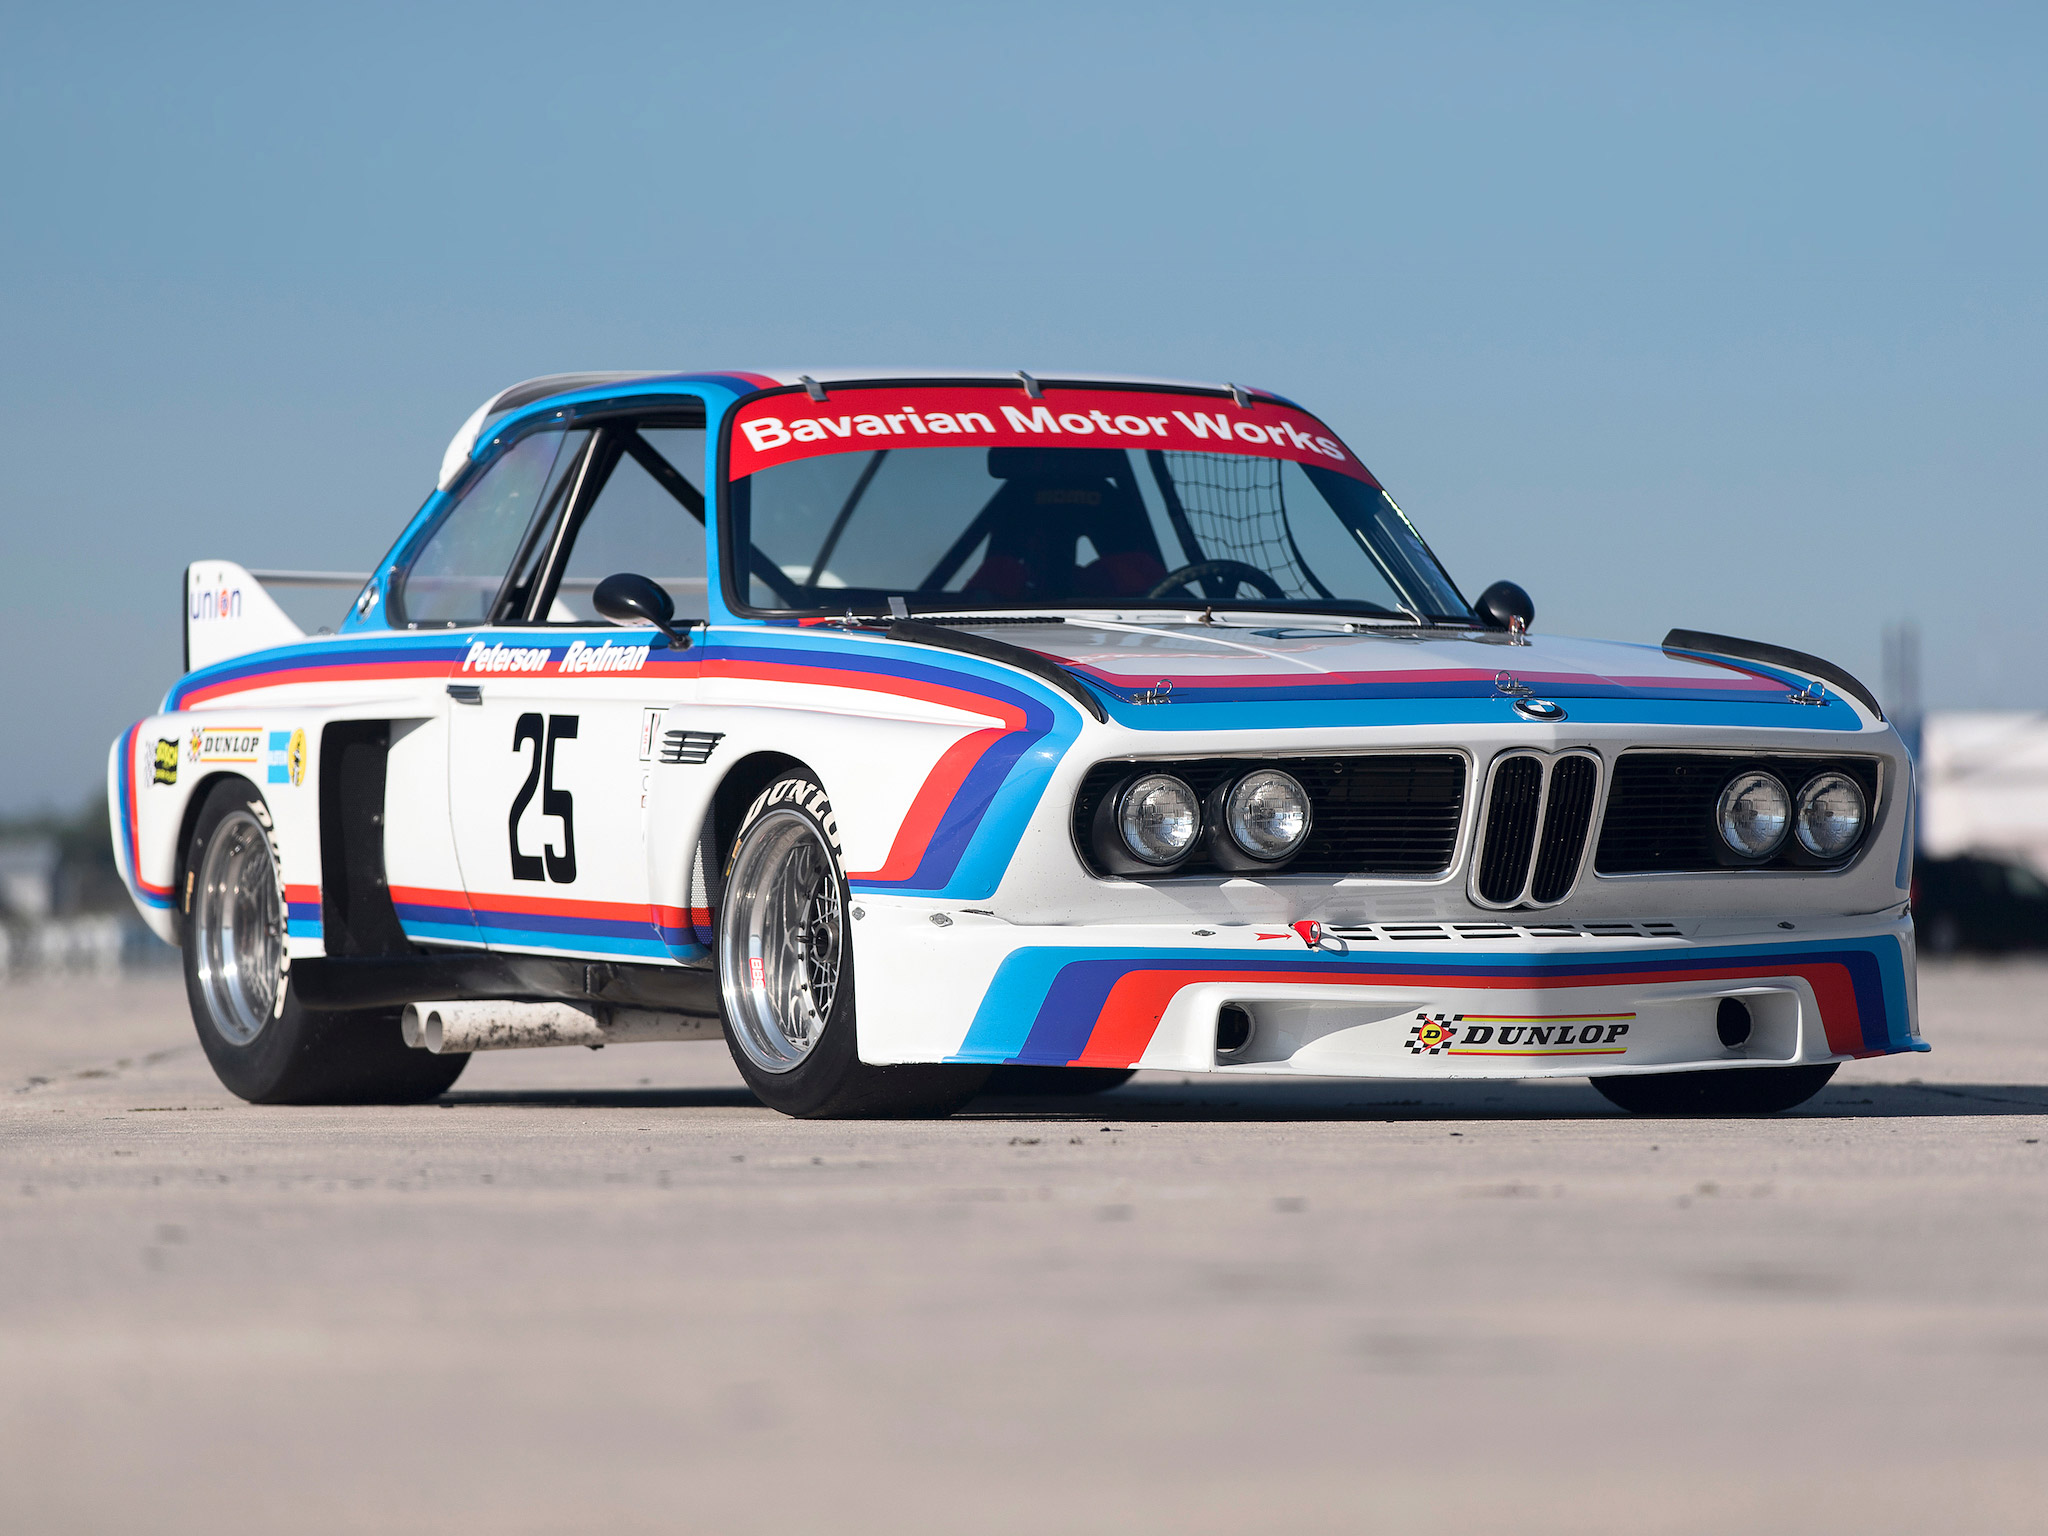 The Legend Of The 75 3 0 CSL: A Racecar Like No Other